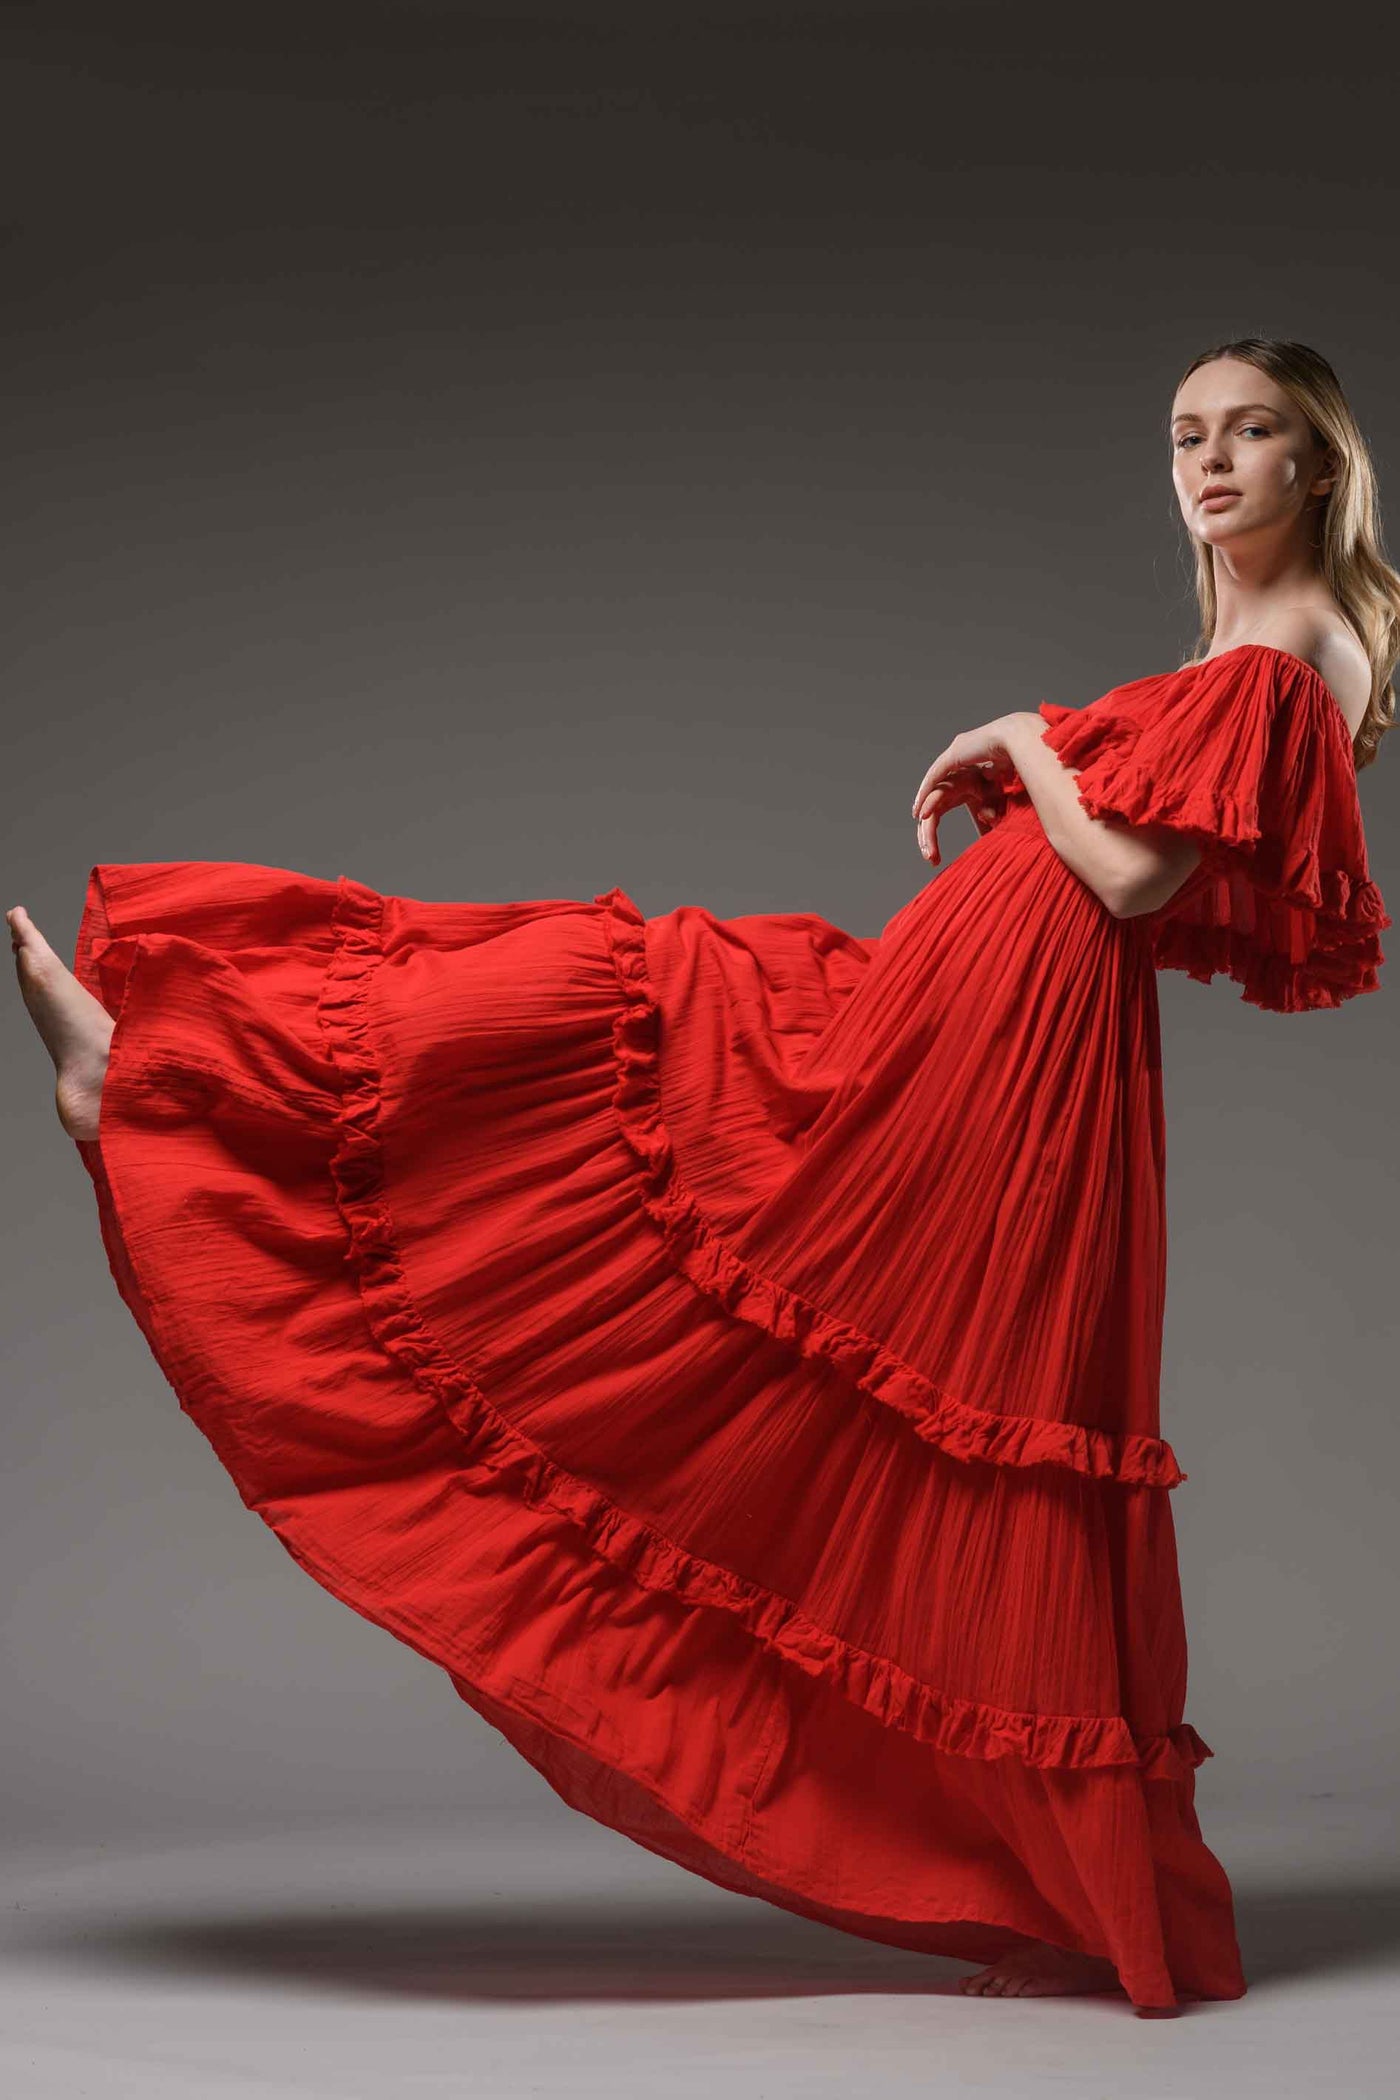 Hippie elegant double layer off the shoulder red cotton maxi dress